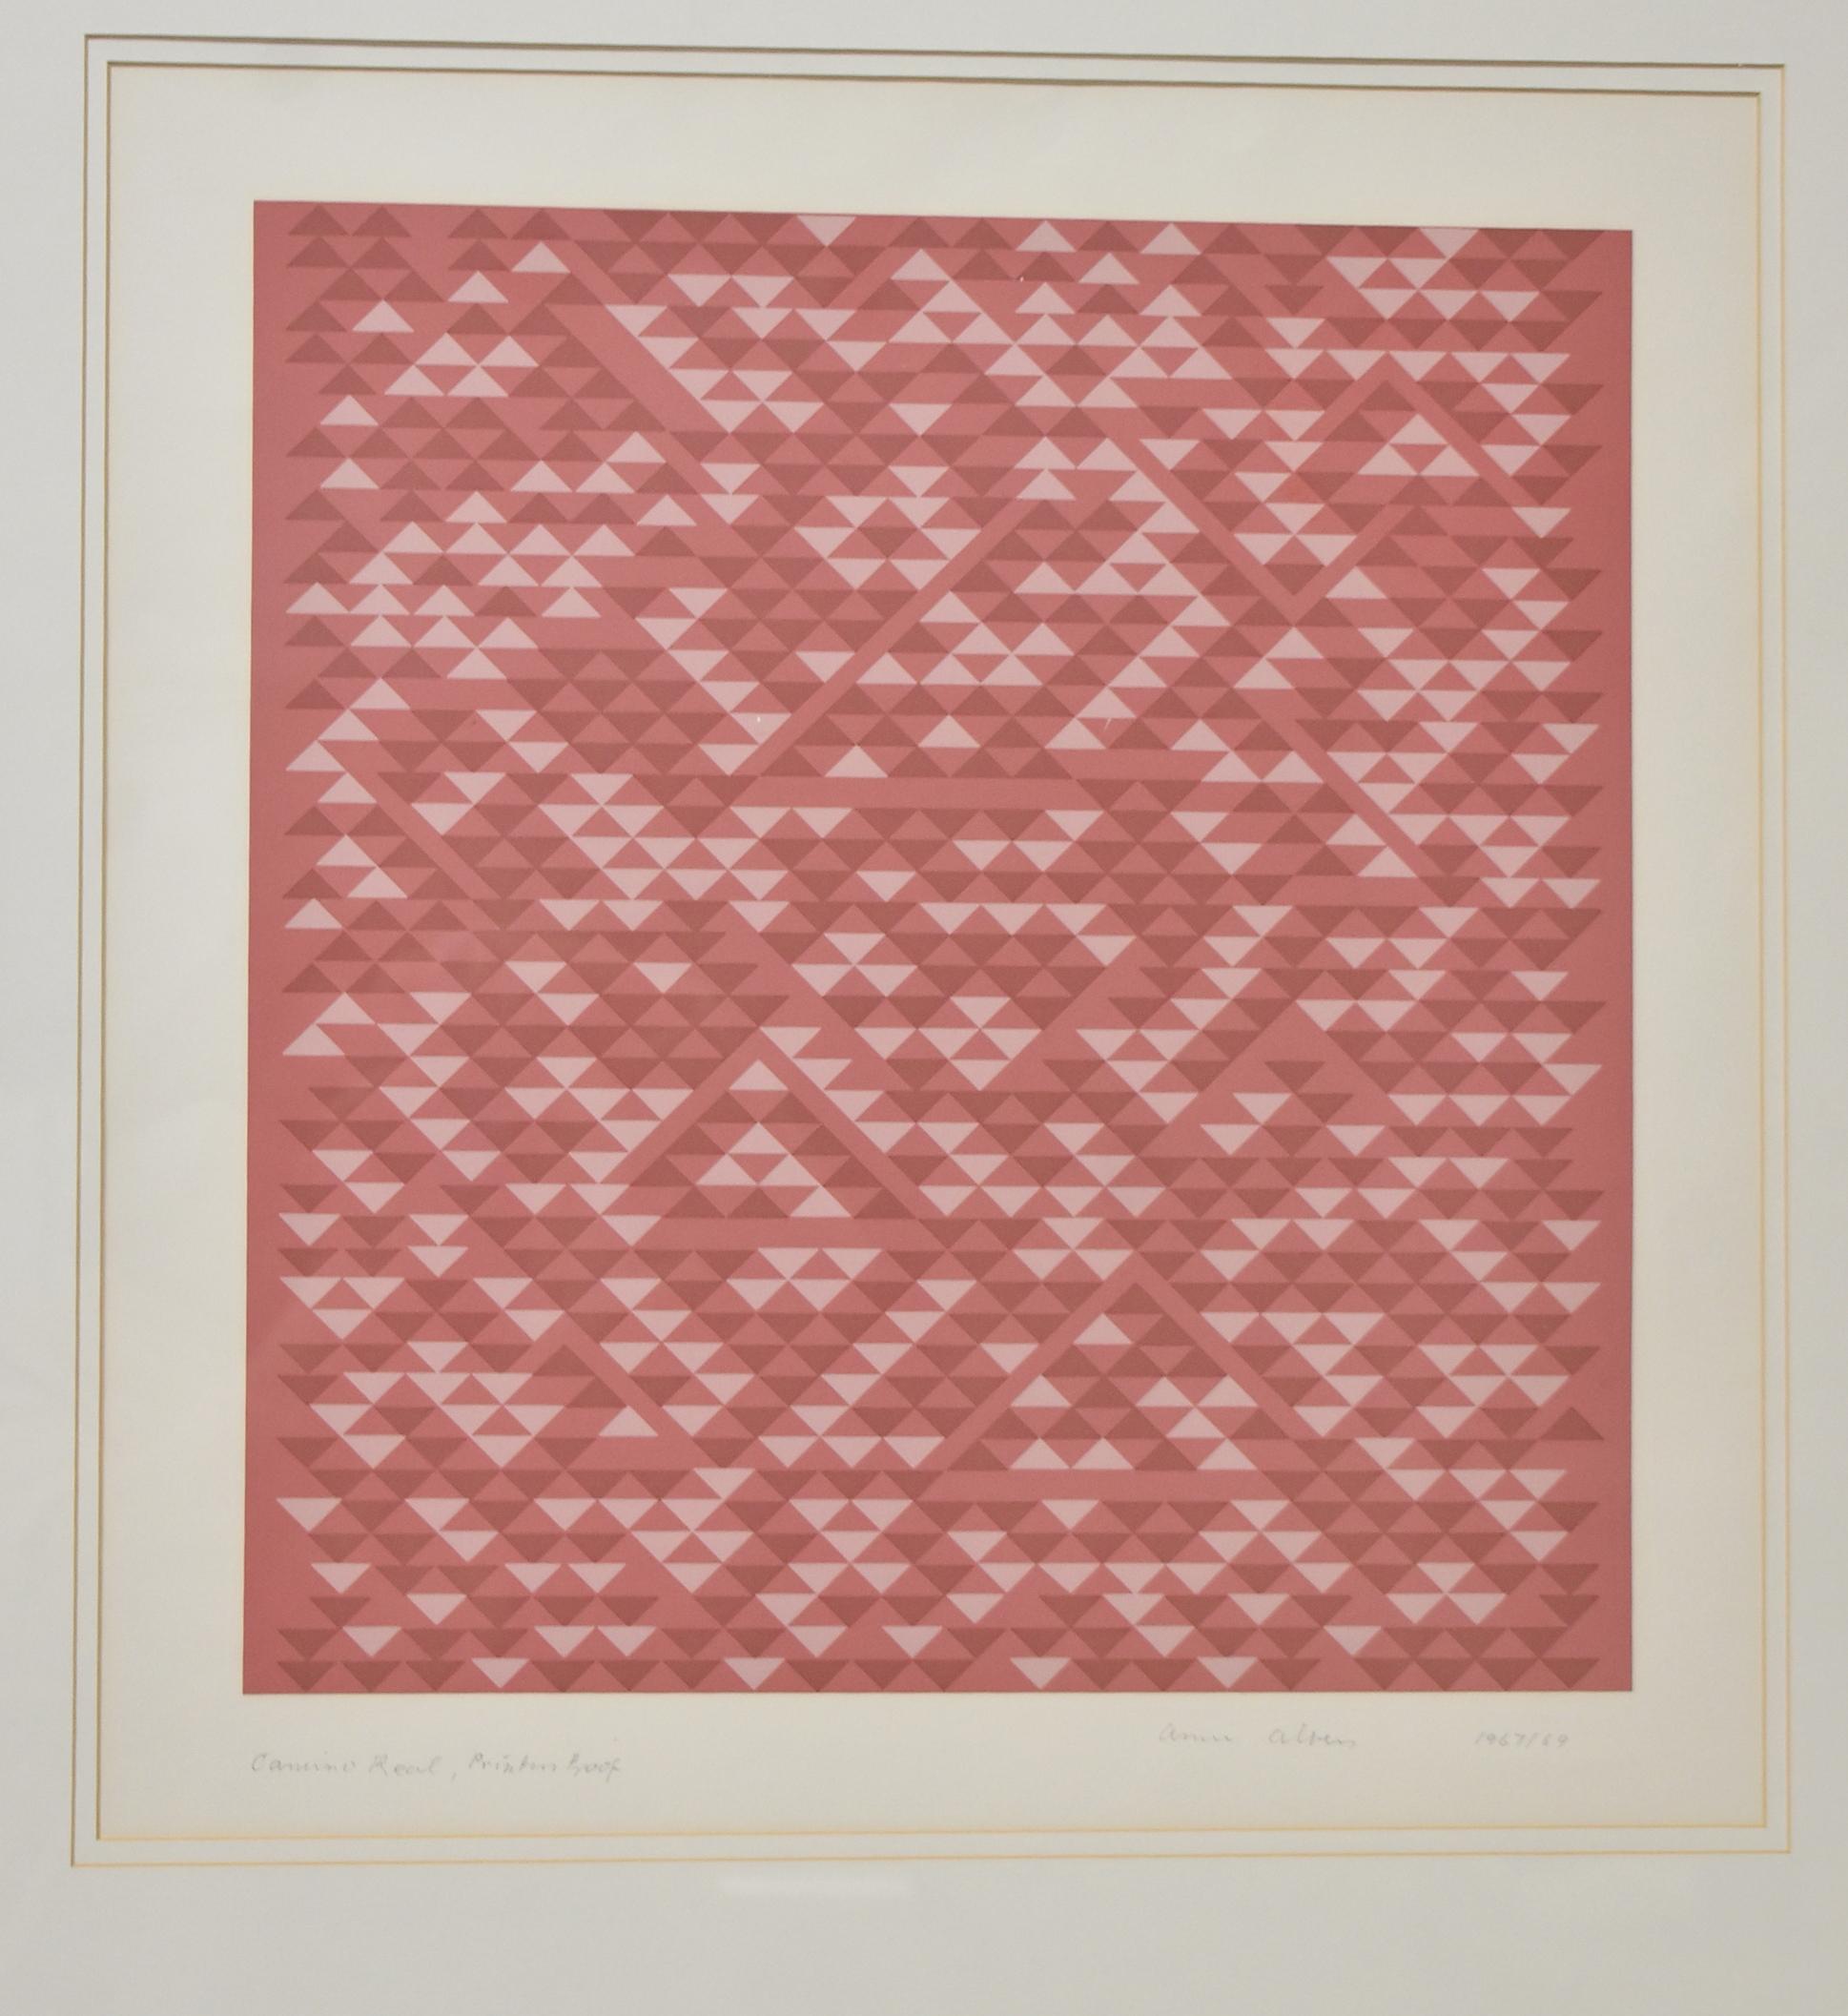 Anni Albers, Camino Real Screen-print Abstraction. Circa 1967-1969. Anni Albers (1899-1994), an artist who played an active part in 20th century modernism yet who has long been overshadowed by her husband, the painter and theoretician Josef Albers.